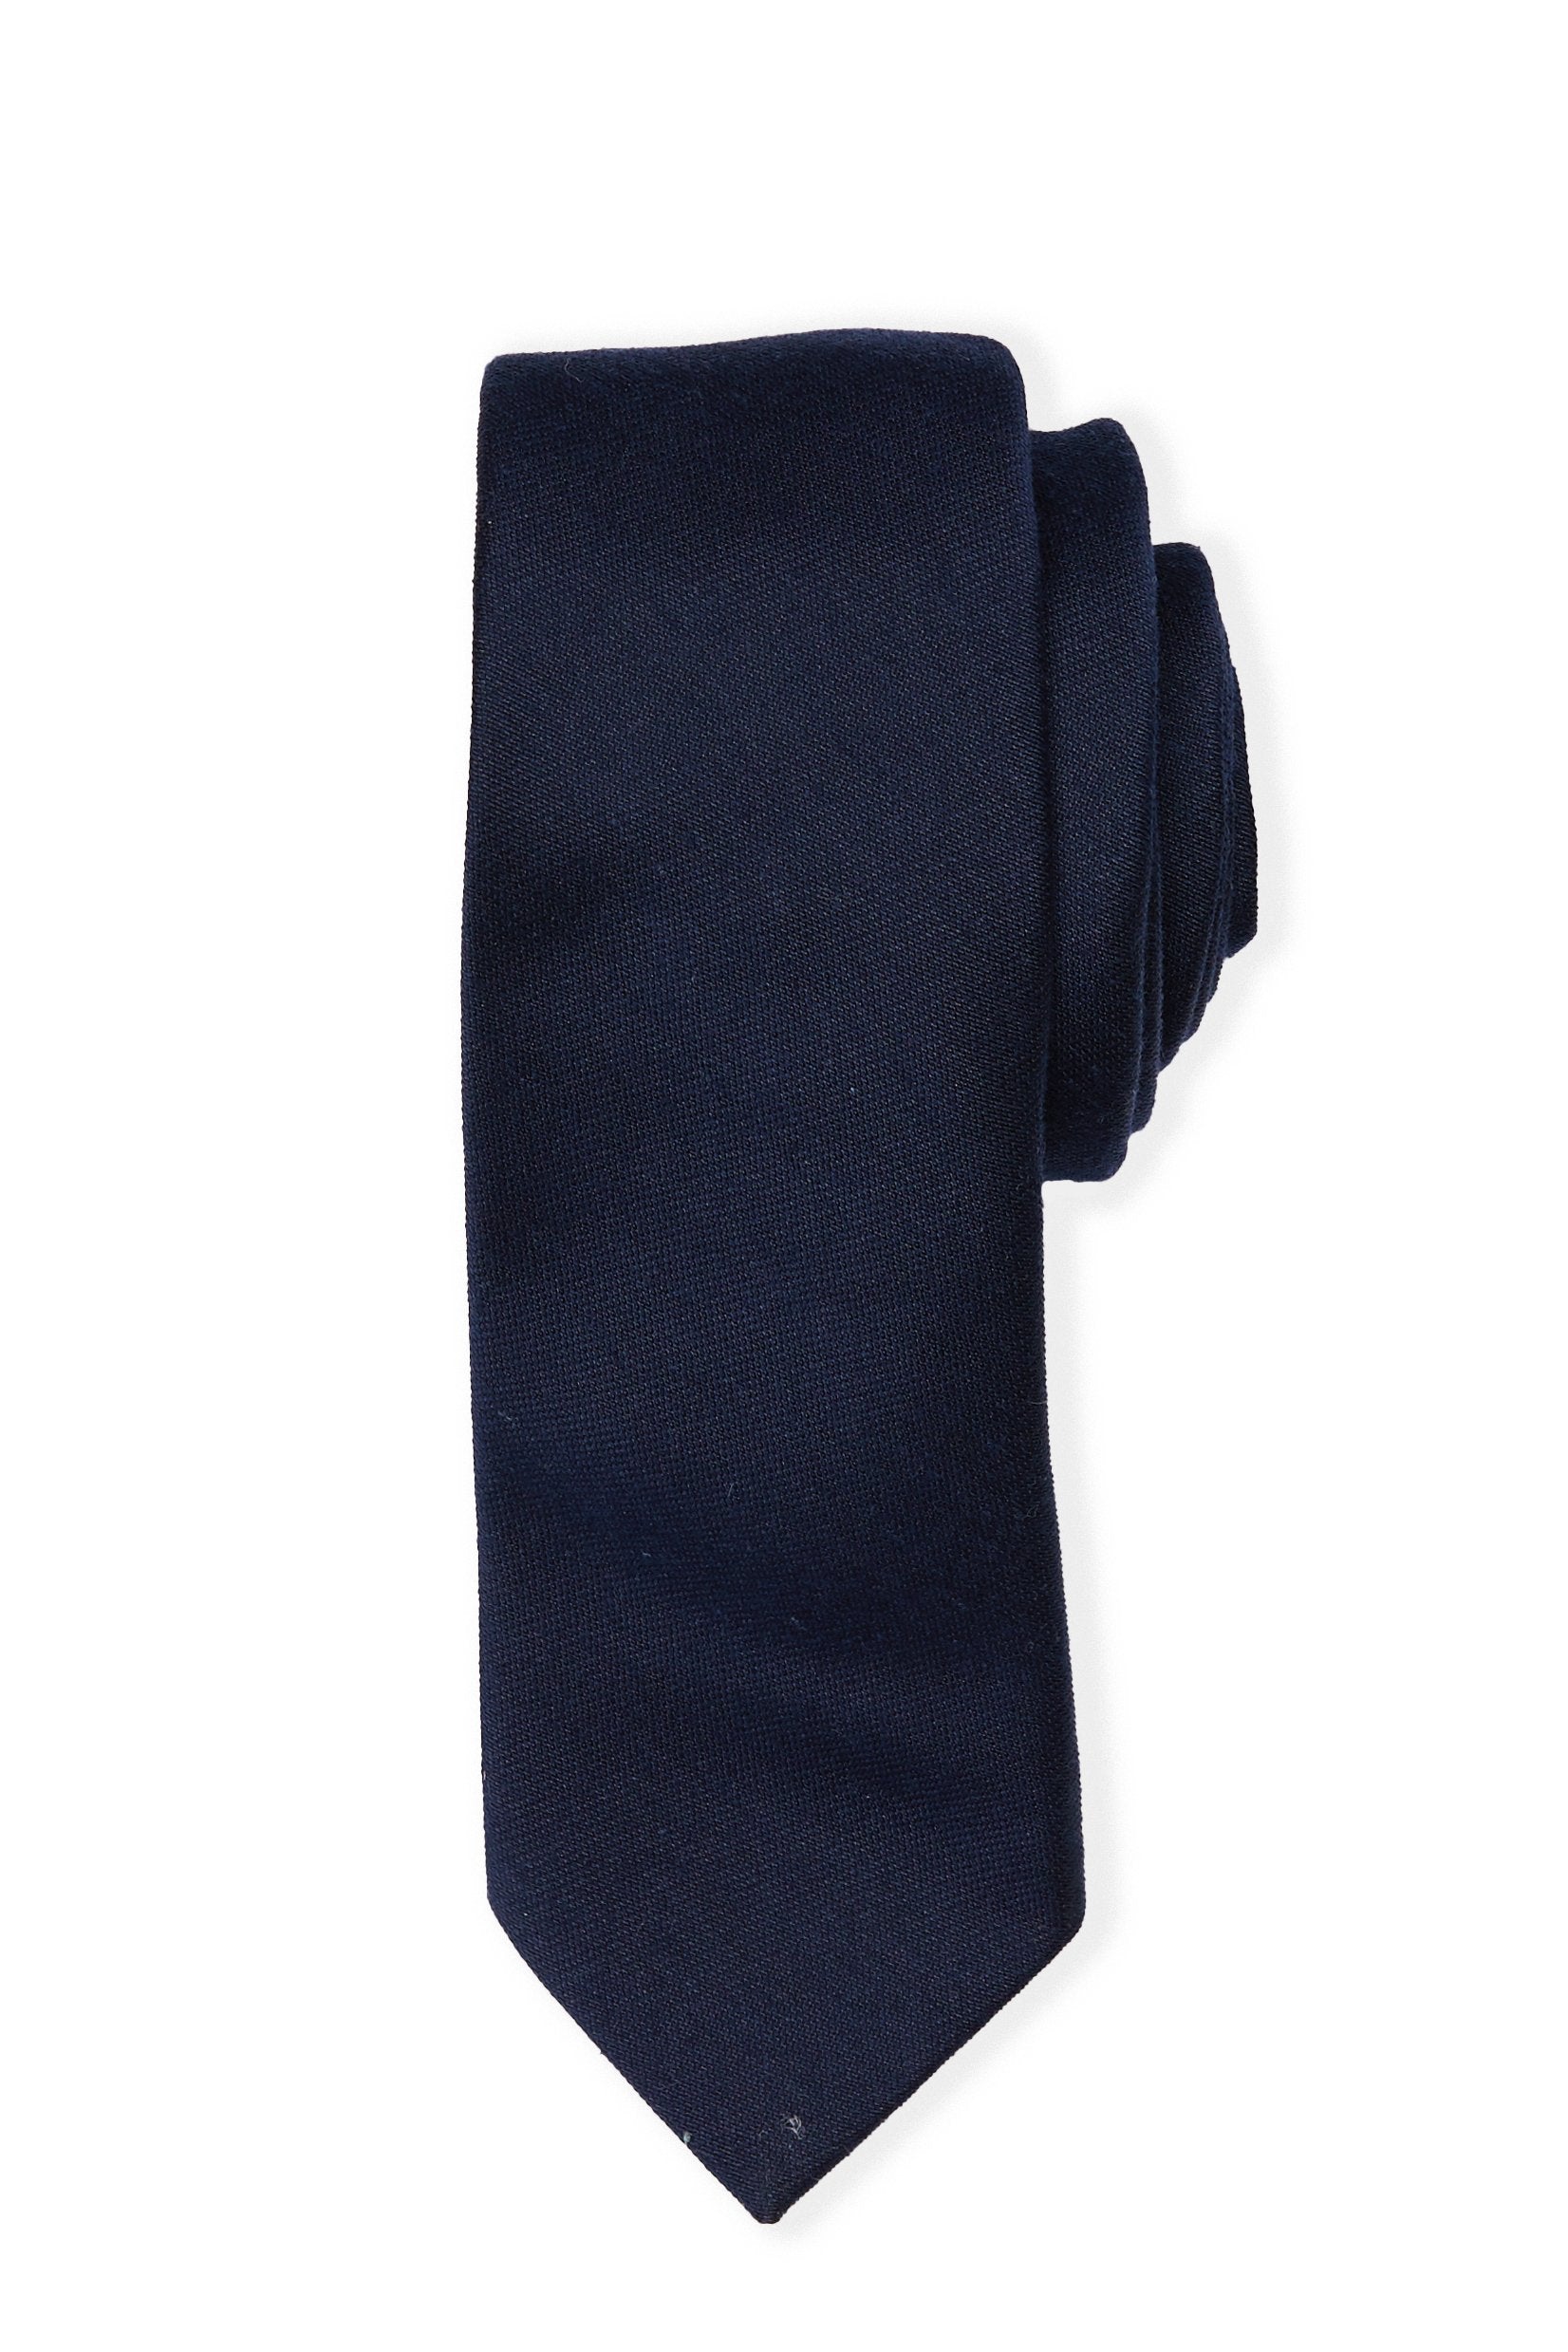 Simon Necktie in Navy by Birdy Grey, front view